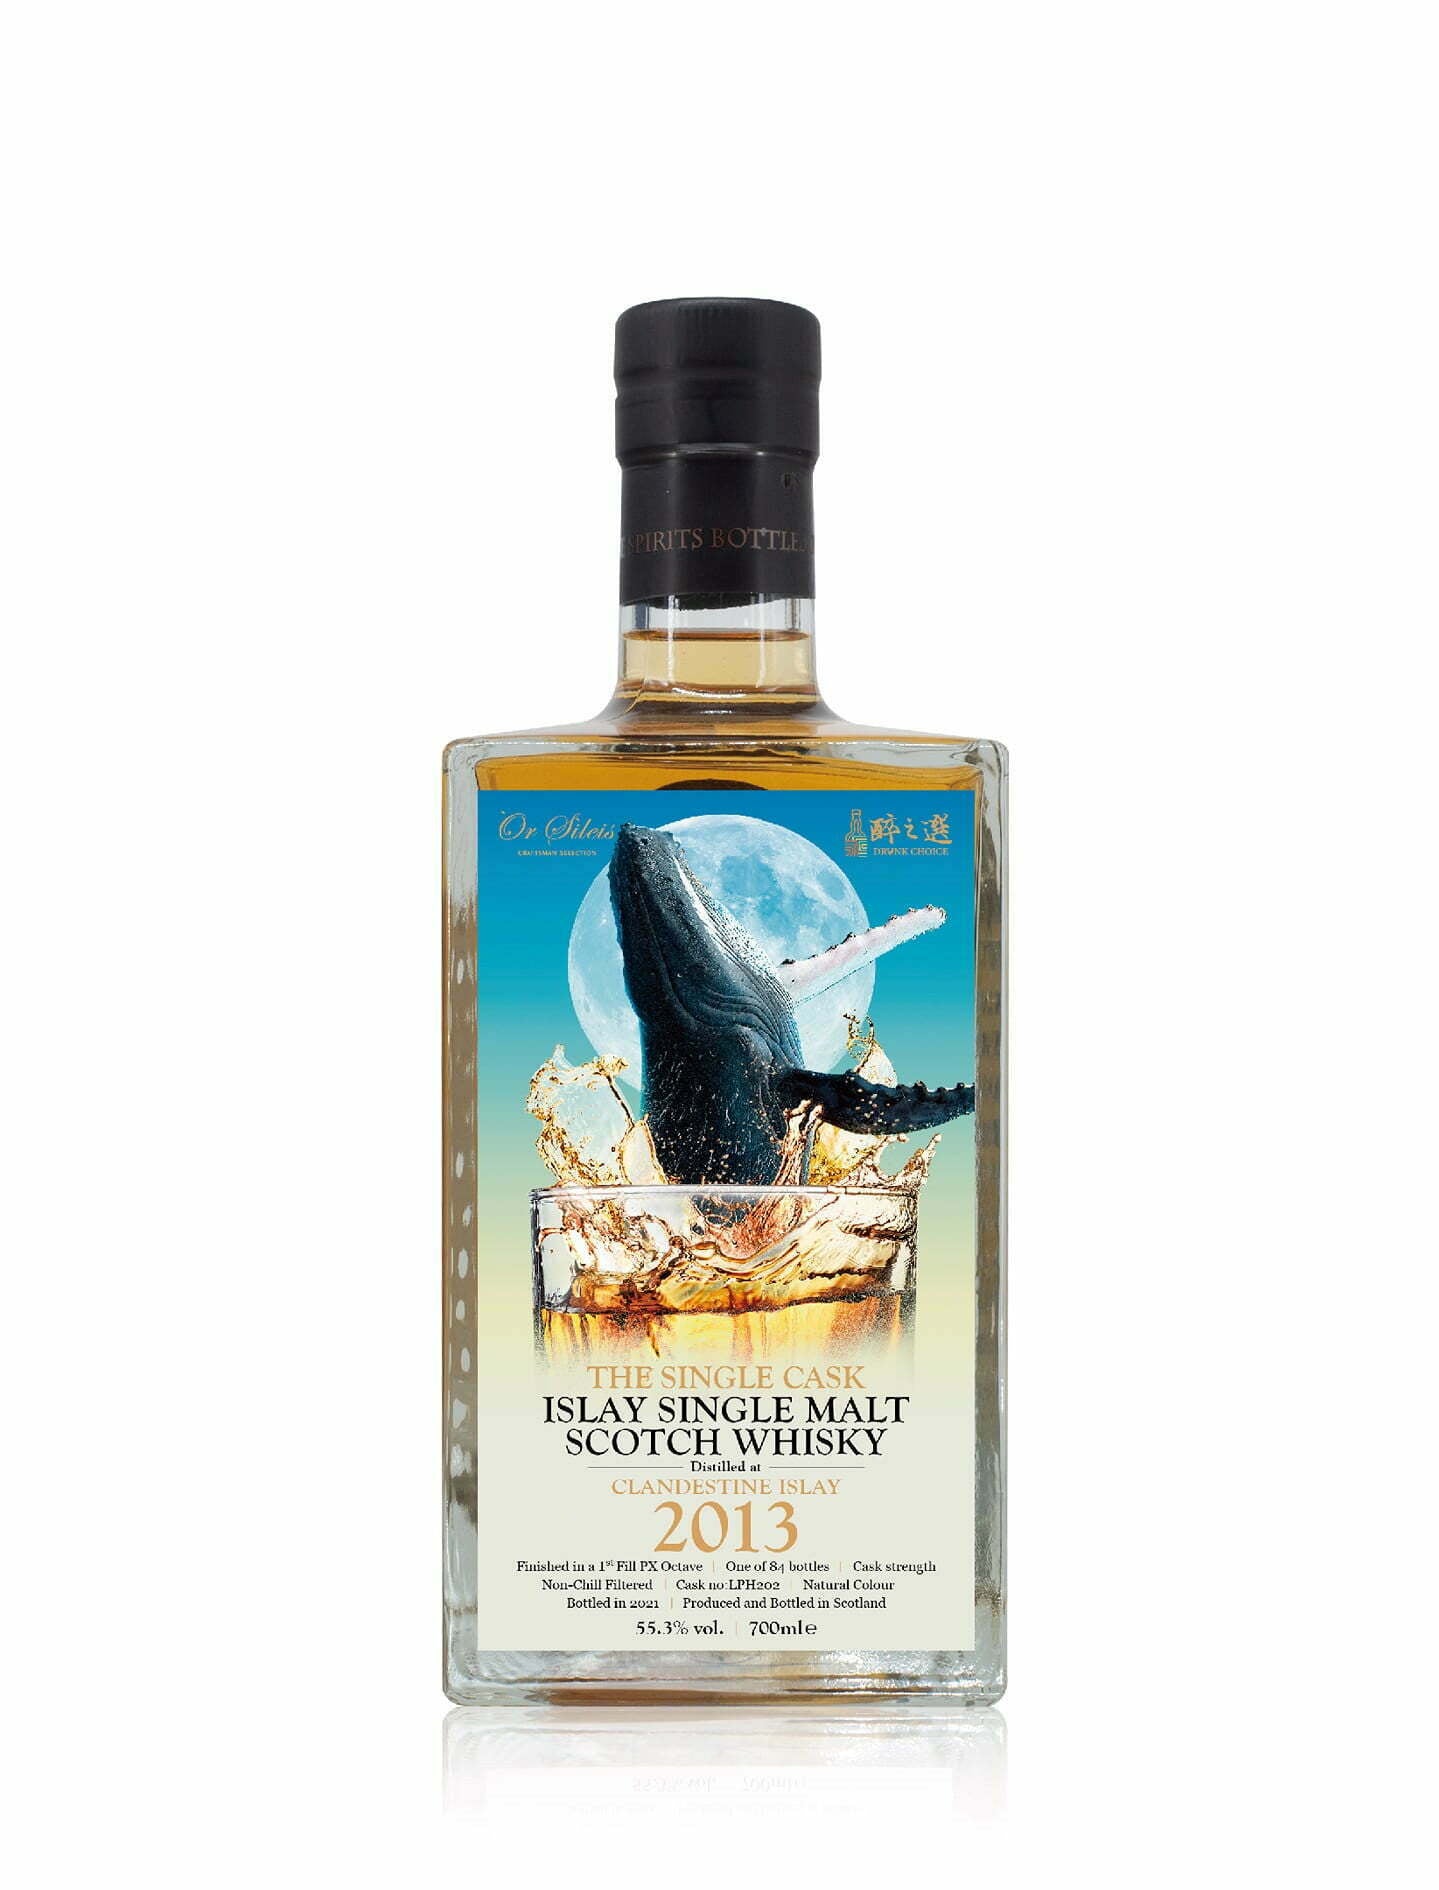 Clandestine Islay 2013-2021 1st Fill PX Octave (LPH) (1x70cl) - TwoMoreGlasses.com